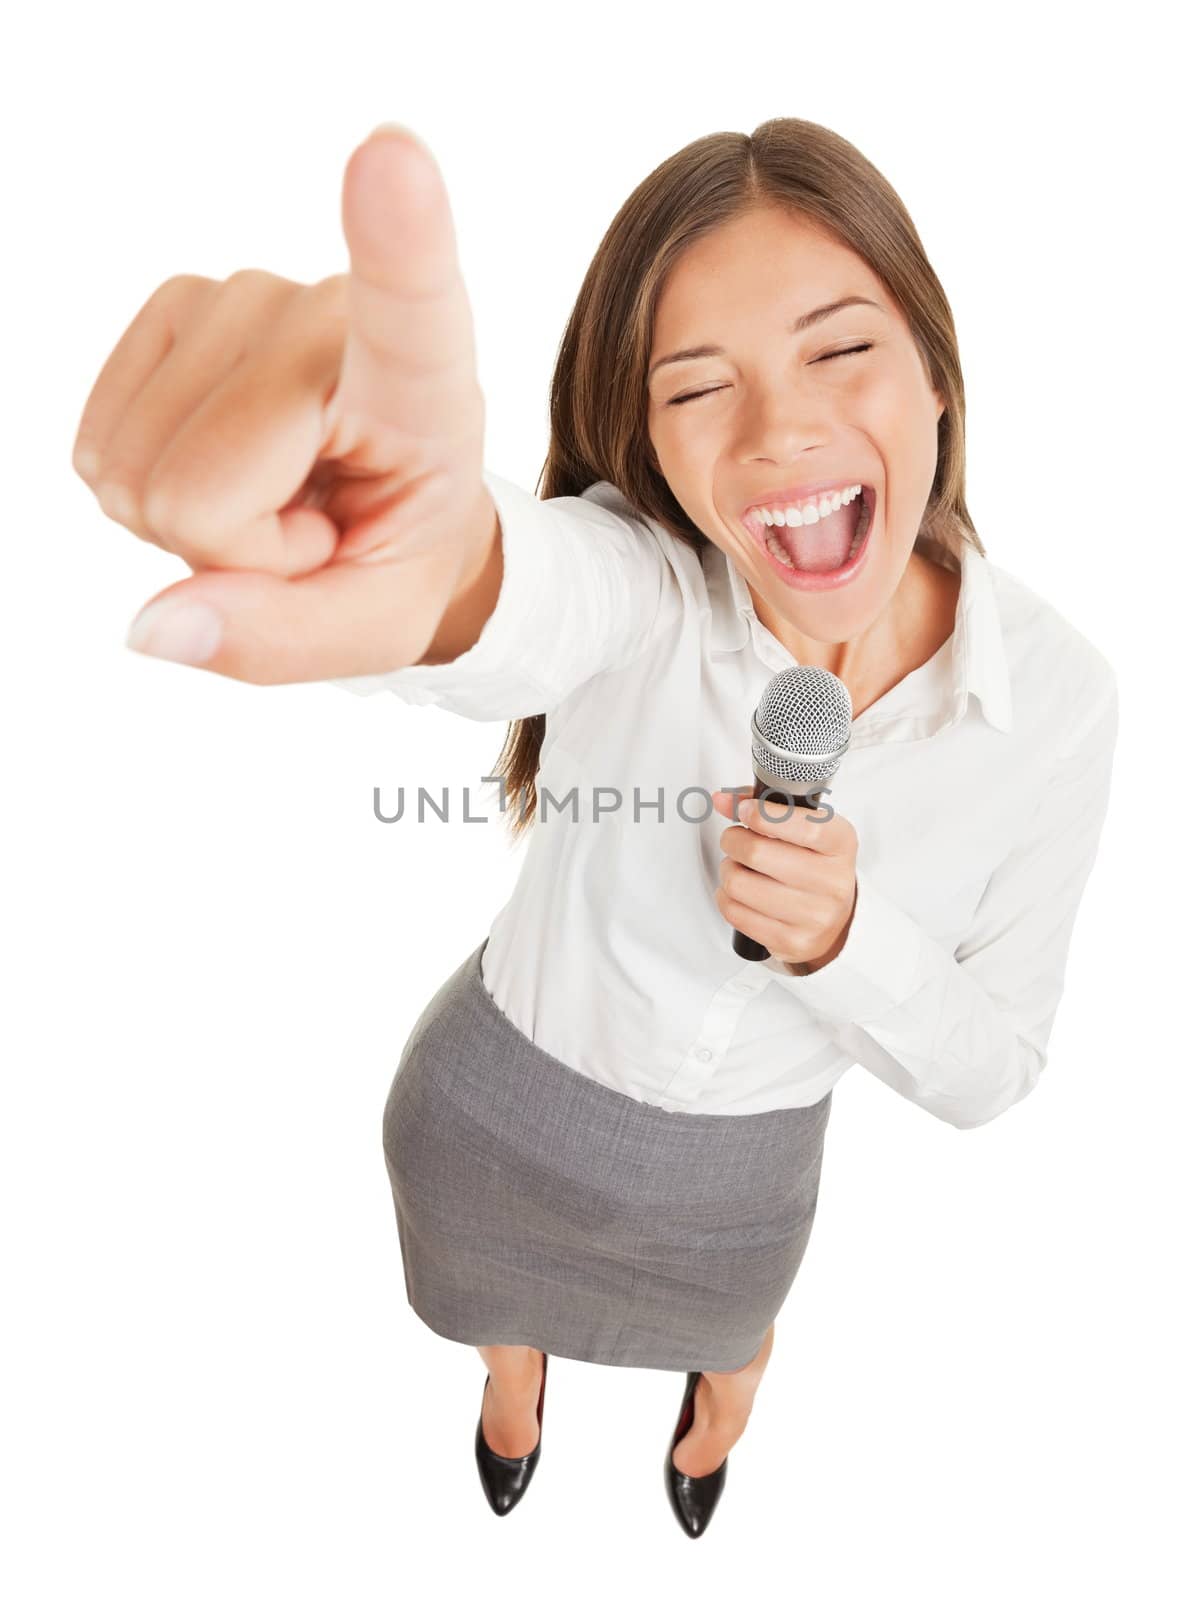 Fun high angle view of a passionate attractive young woman holding a microphone singing or making a point during a speech gesturing and pointing her finger at the camera isolated on white